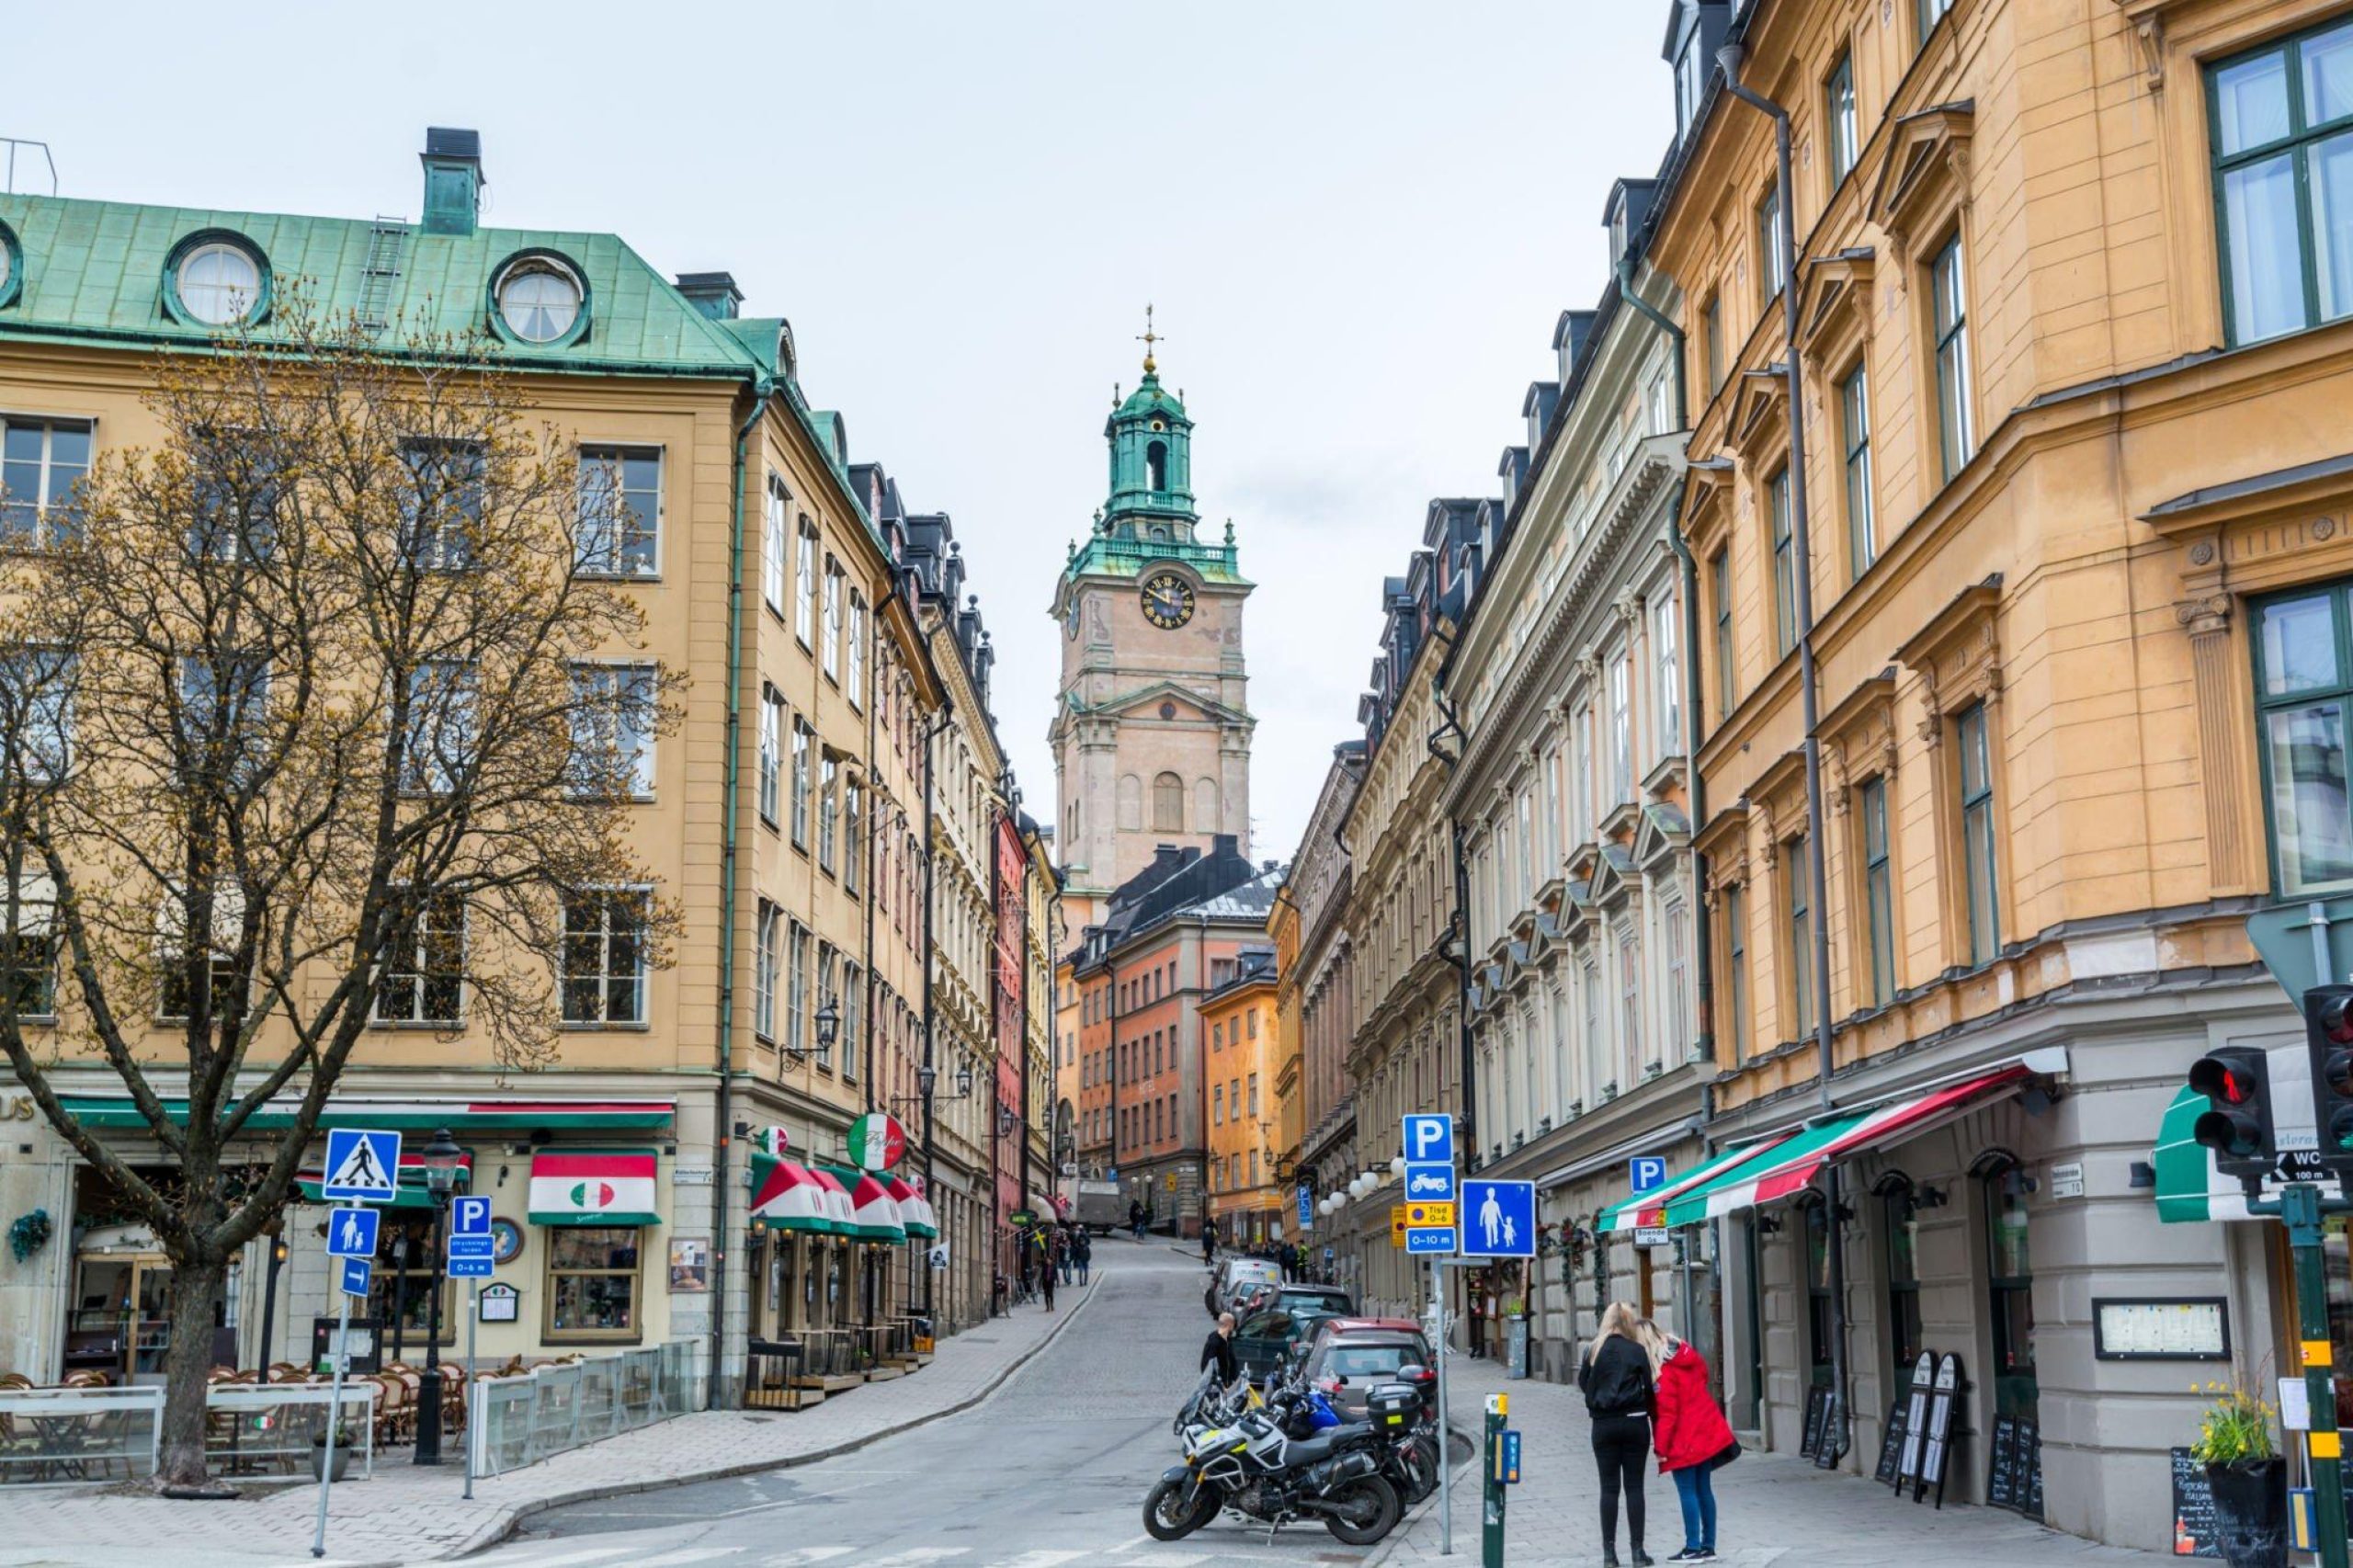 Stockholm’s Old Town, Gamla Stan